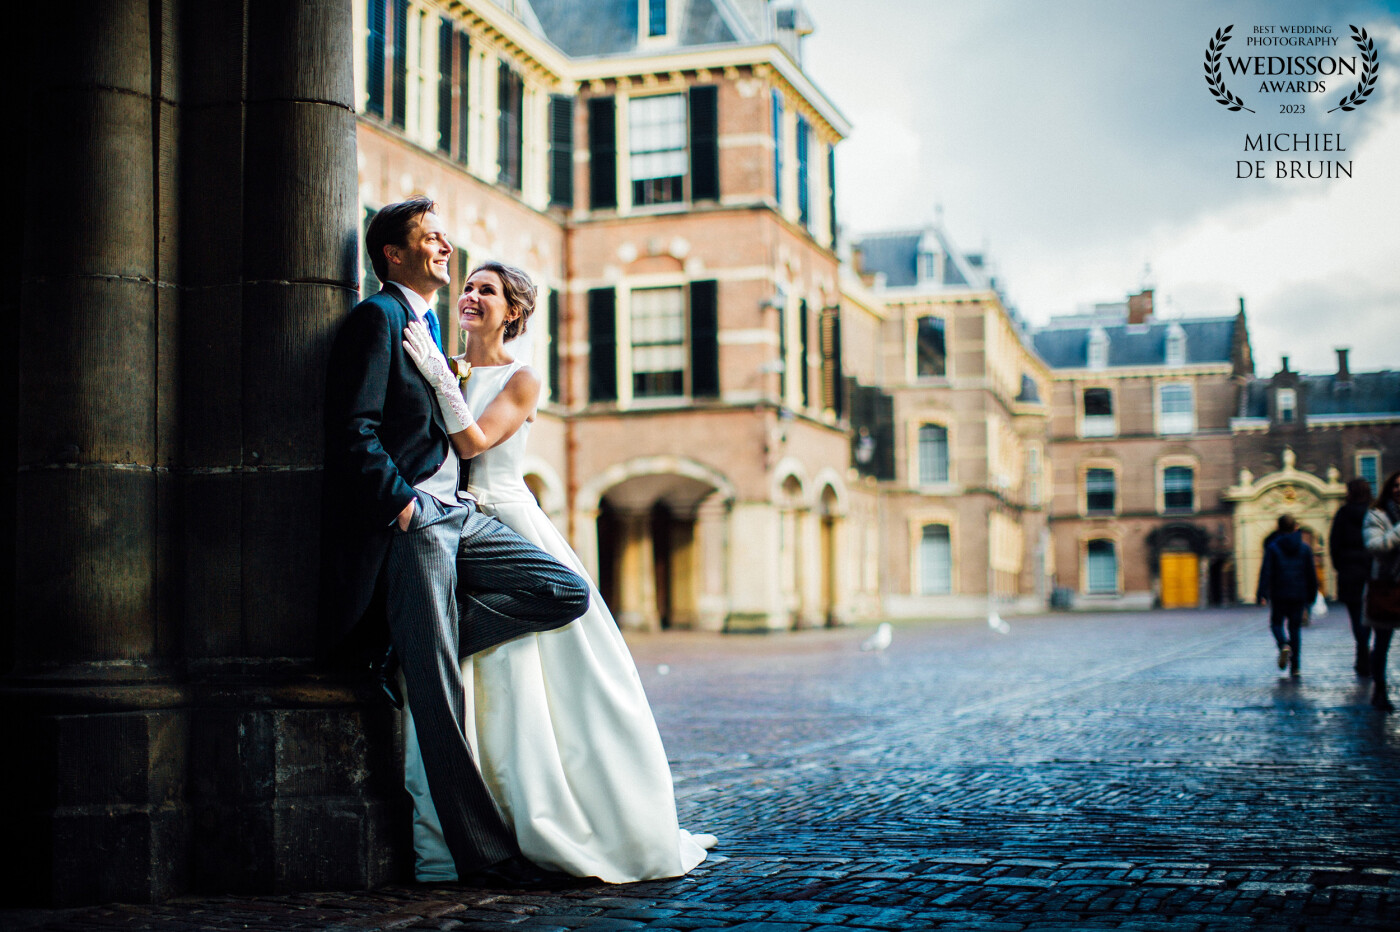 It was almost freezing during this winter wedding in the Netherlands. Luckily this couple was very nice to work with and we were able to warm up with some hot chocolate in a restaurant after the shoot!